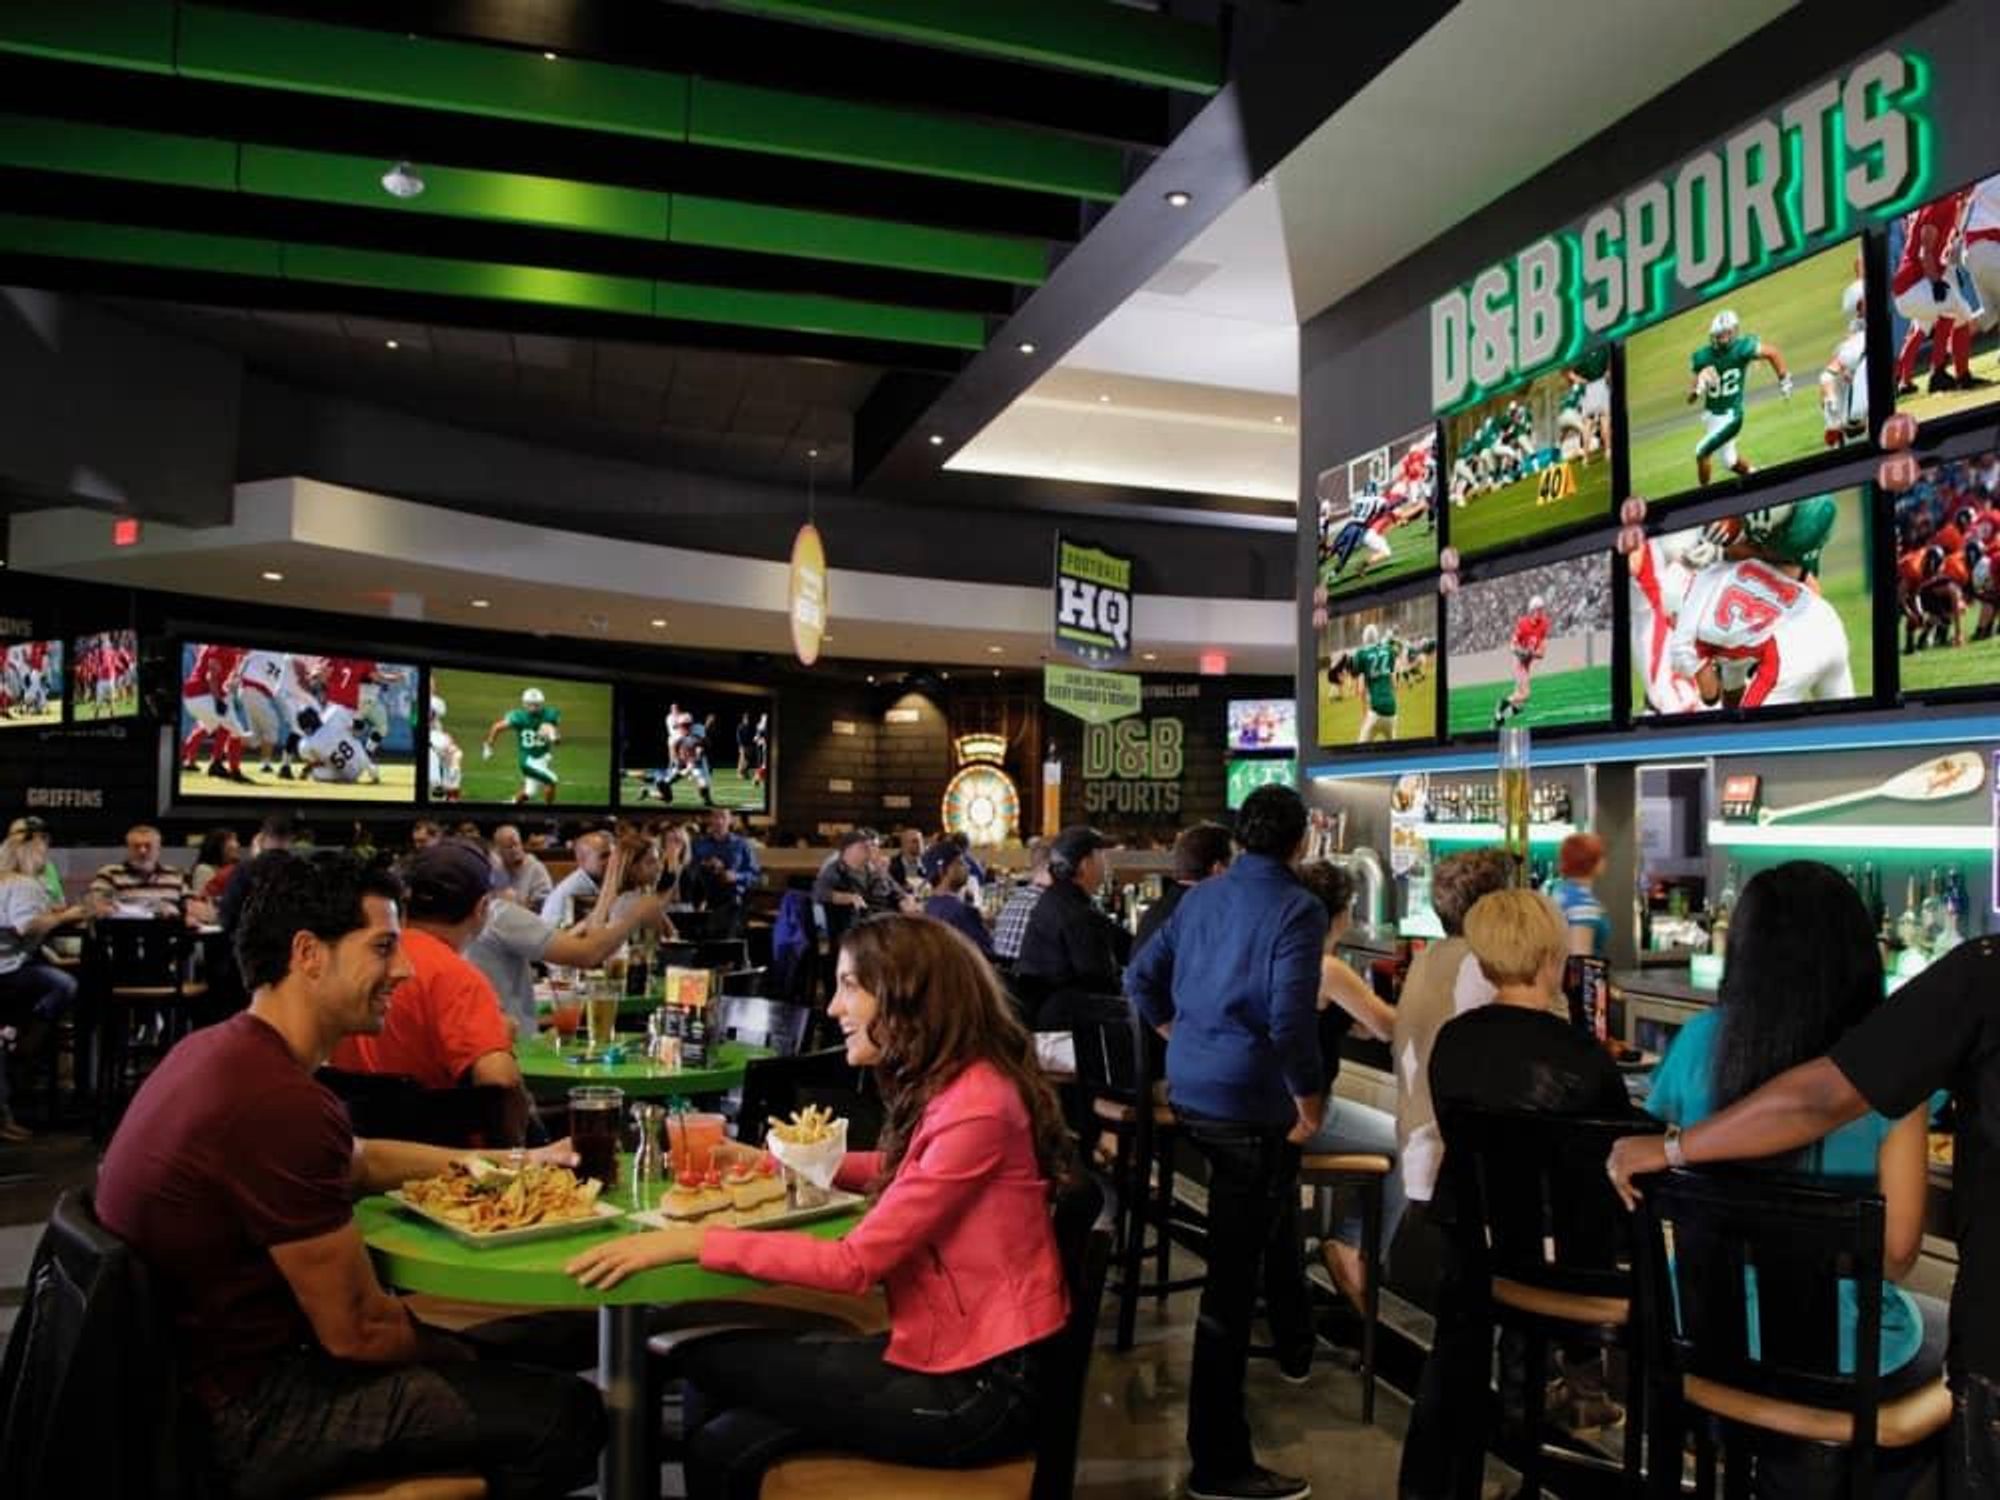 Dave & Buster's firms up opening date in Colorado Springs, Food & Dining